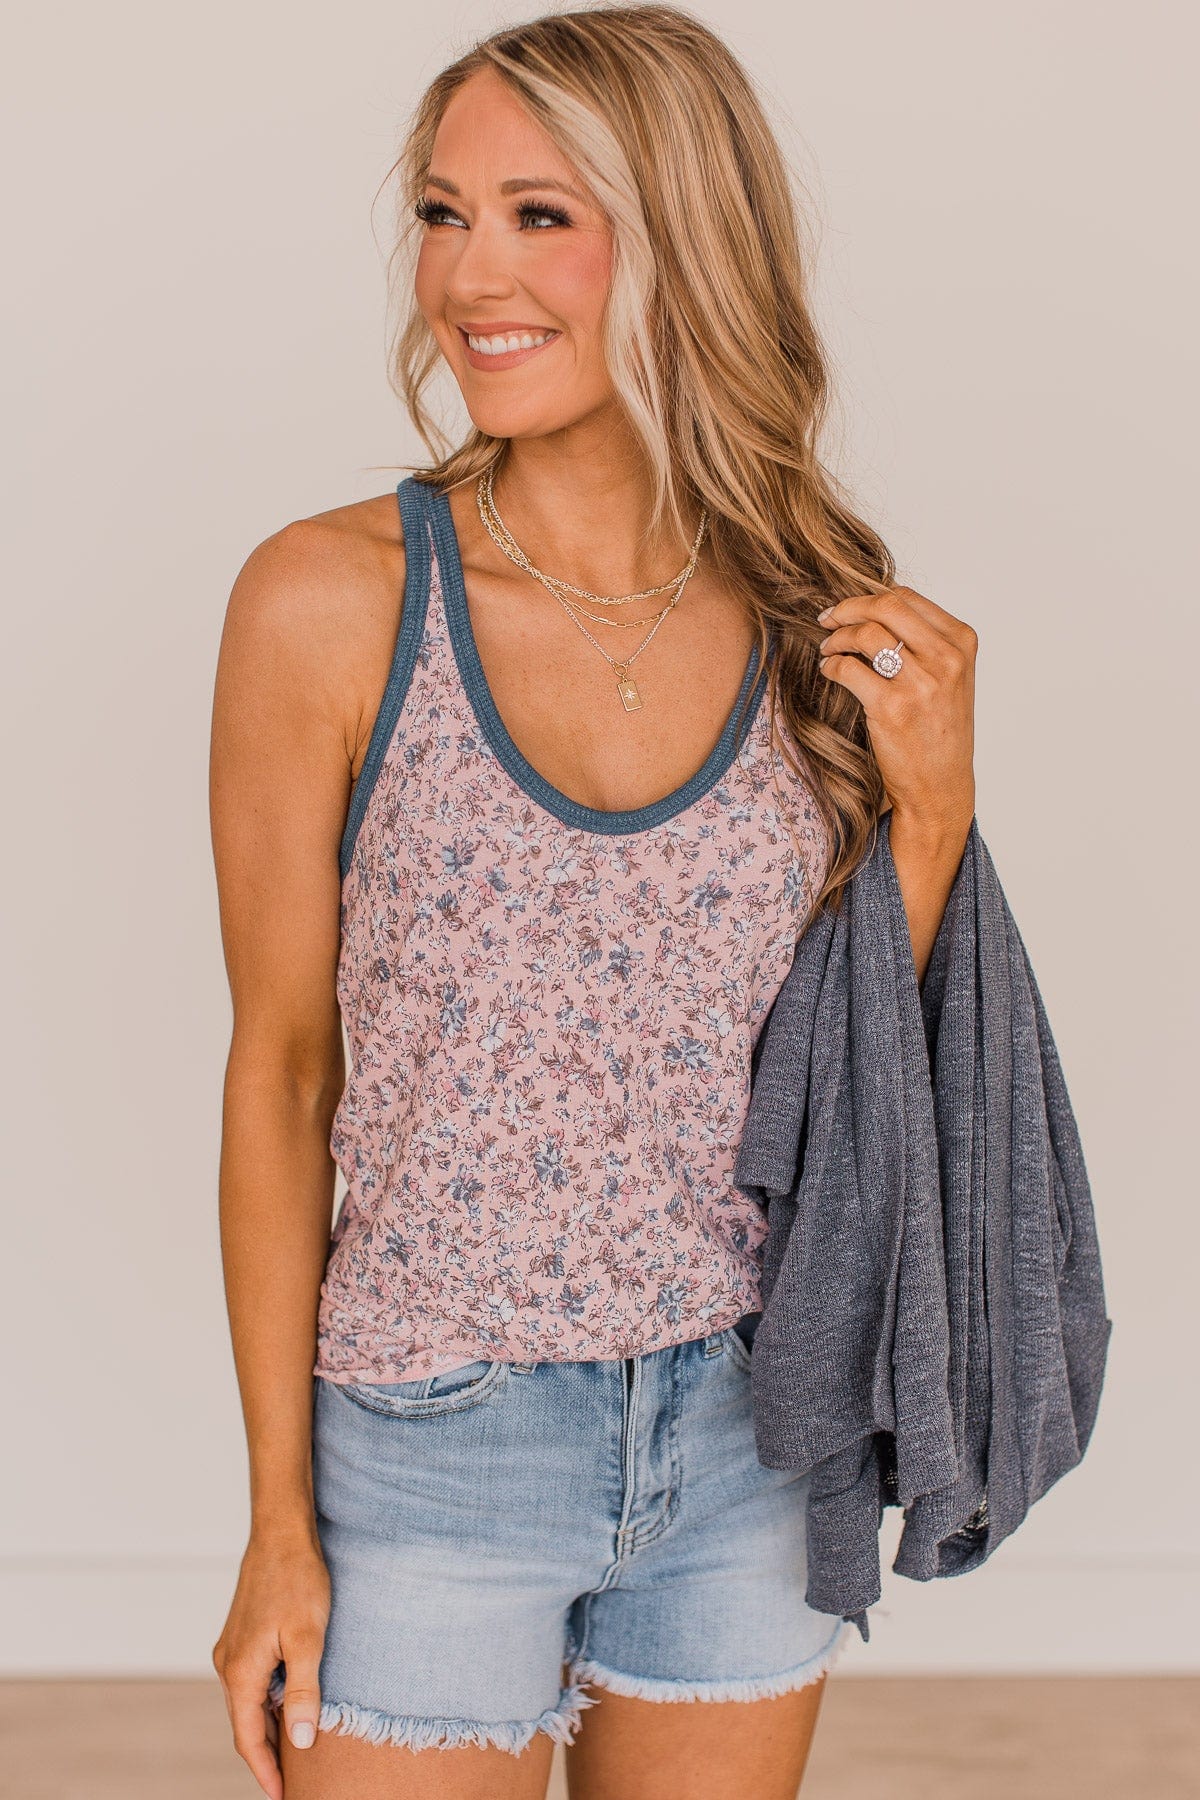 Make It My Own Floral Tank Top- Light Pink & Navy